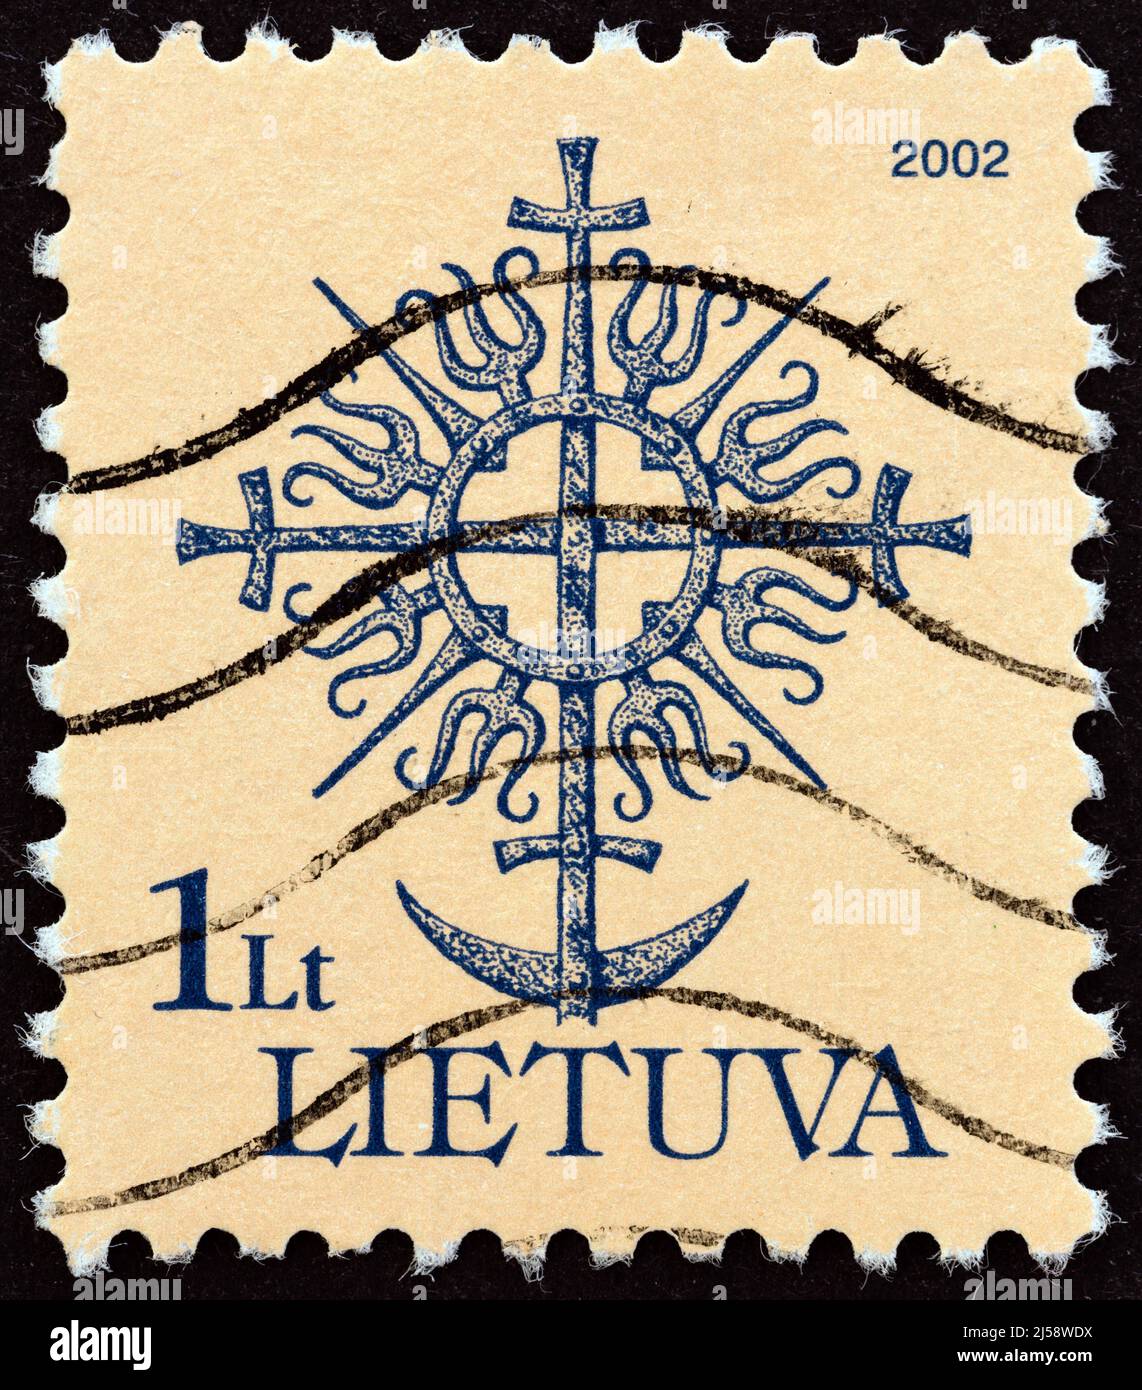 LITHUANIA - CIRCA 2002: A stamp printed in Lithuania shows top of the monument in Veiviryunay, circa 2002. Stock Photo